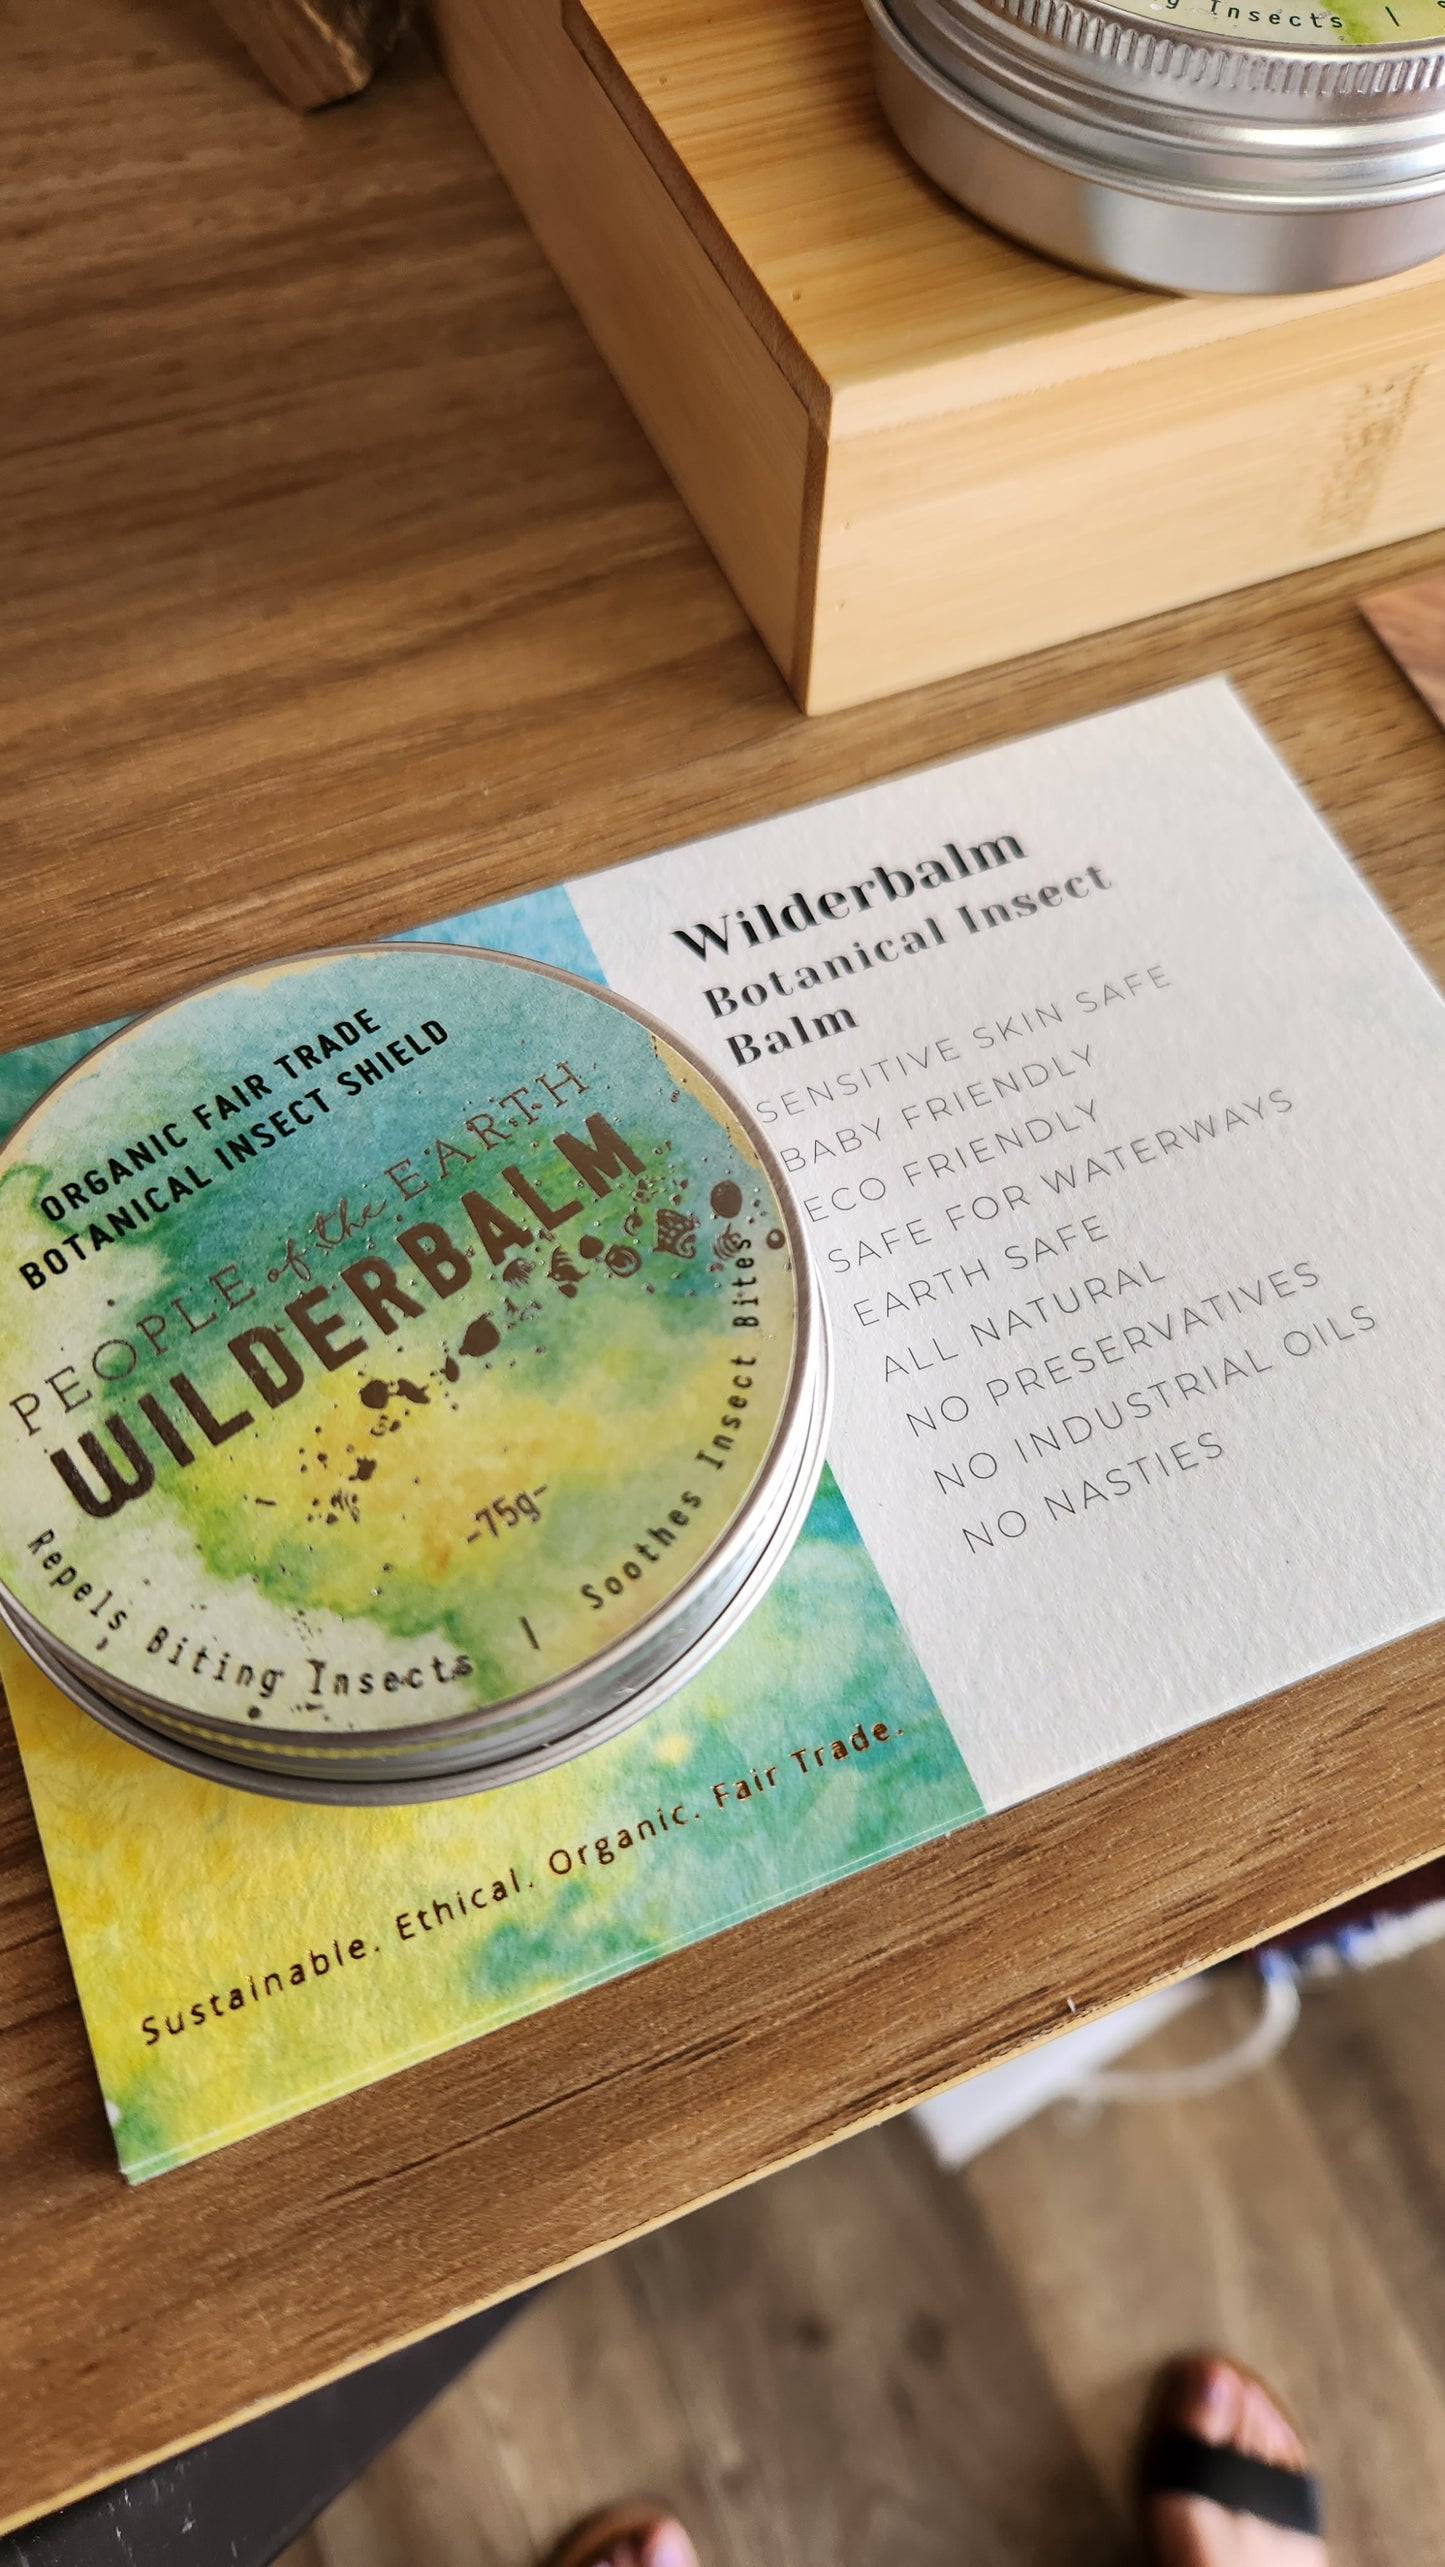 Wilderbalm Insect Shield